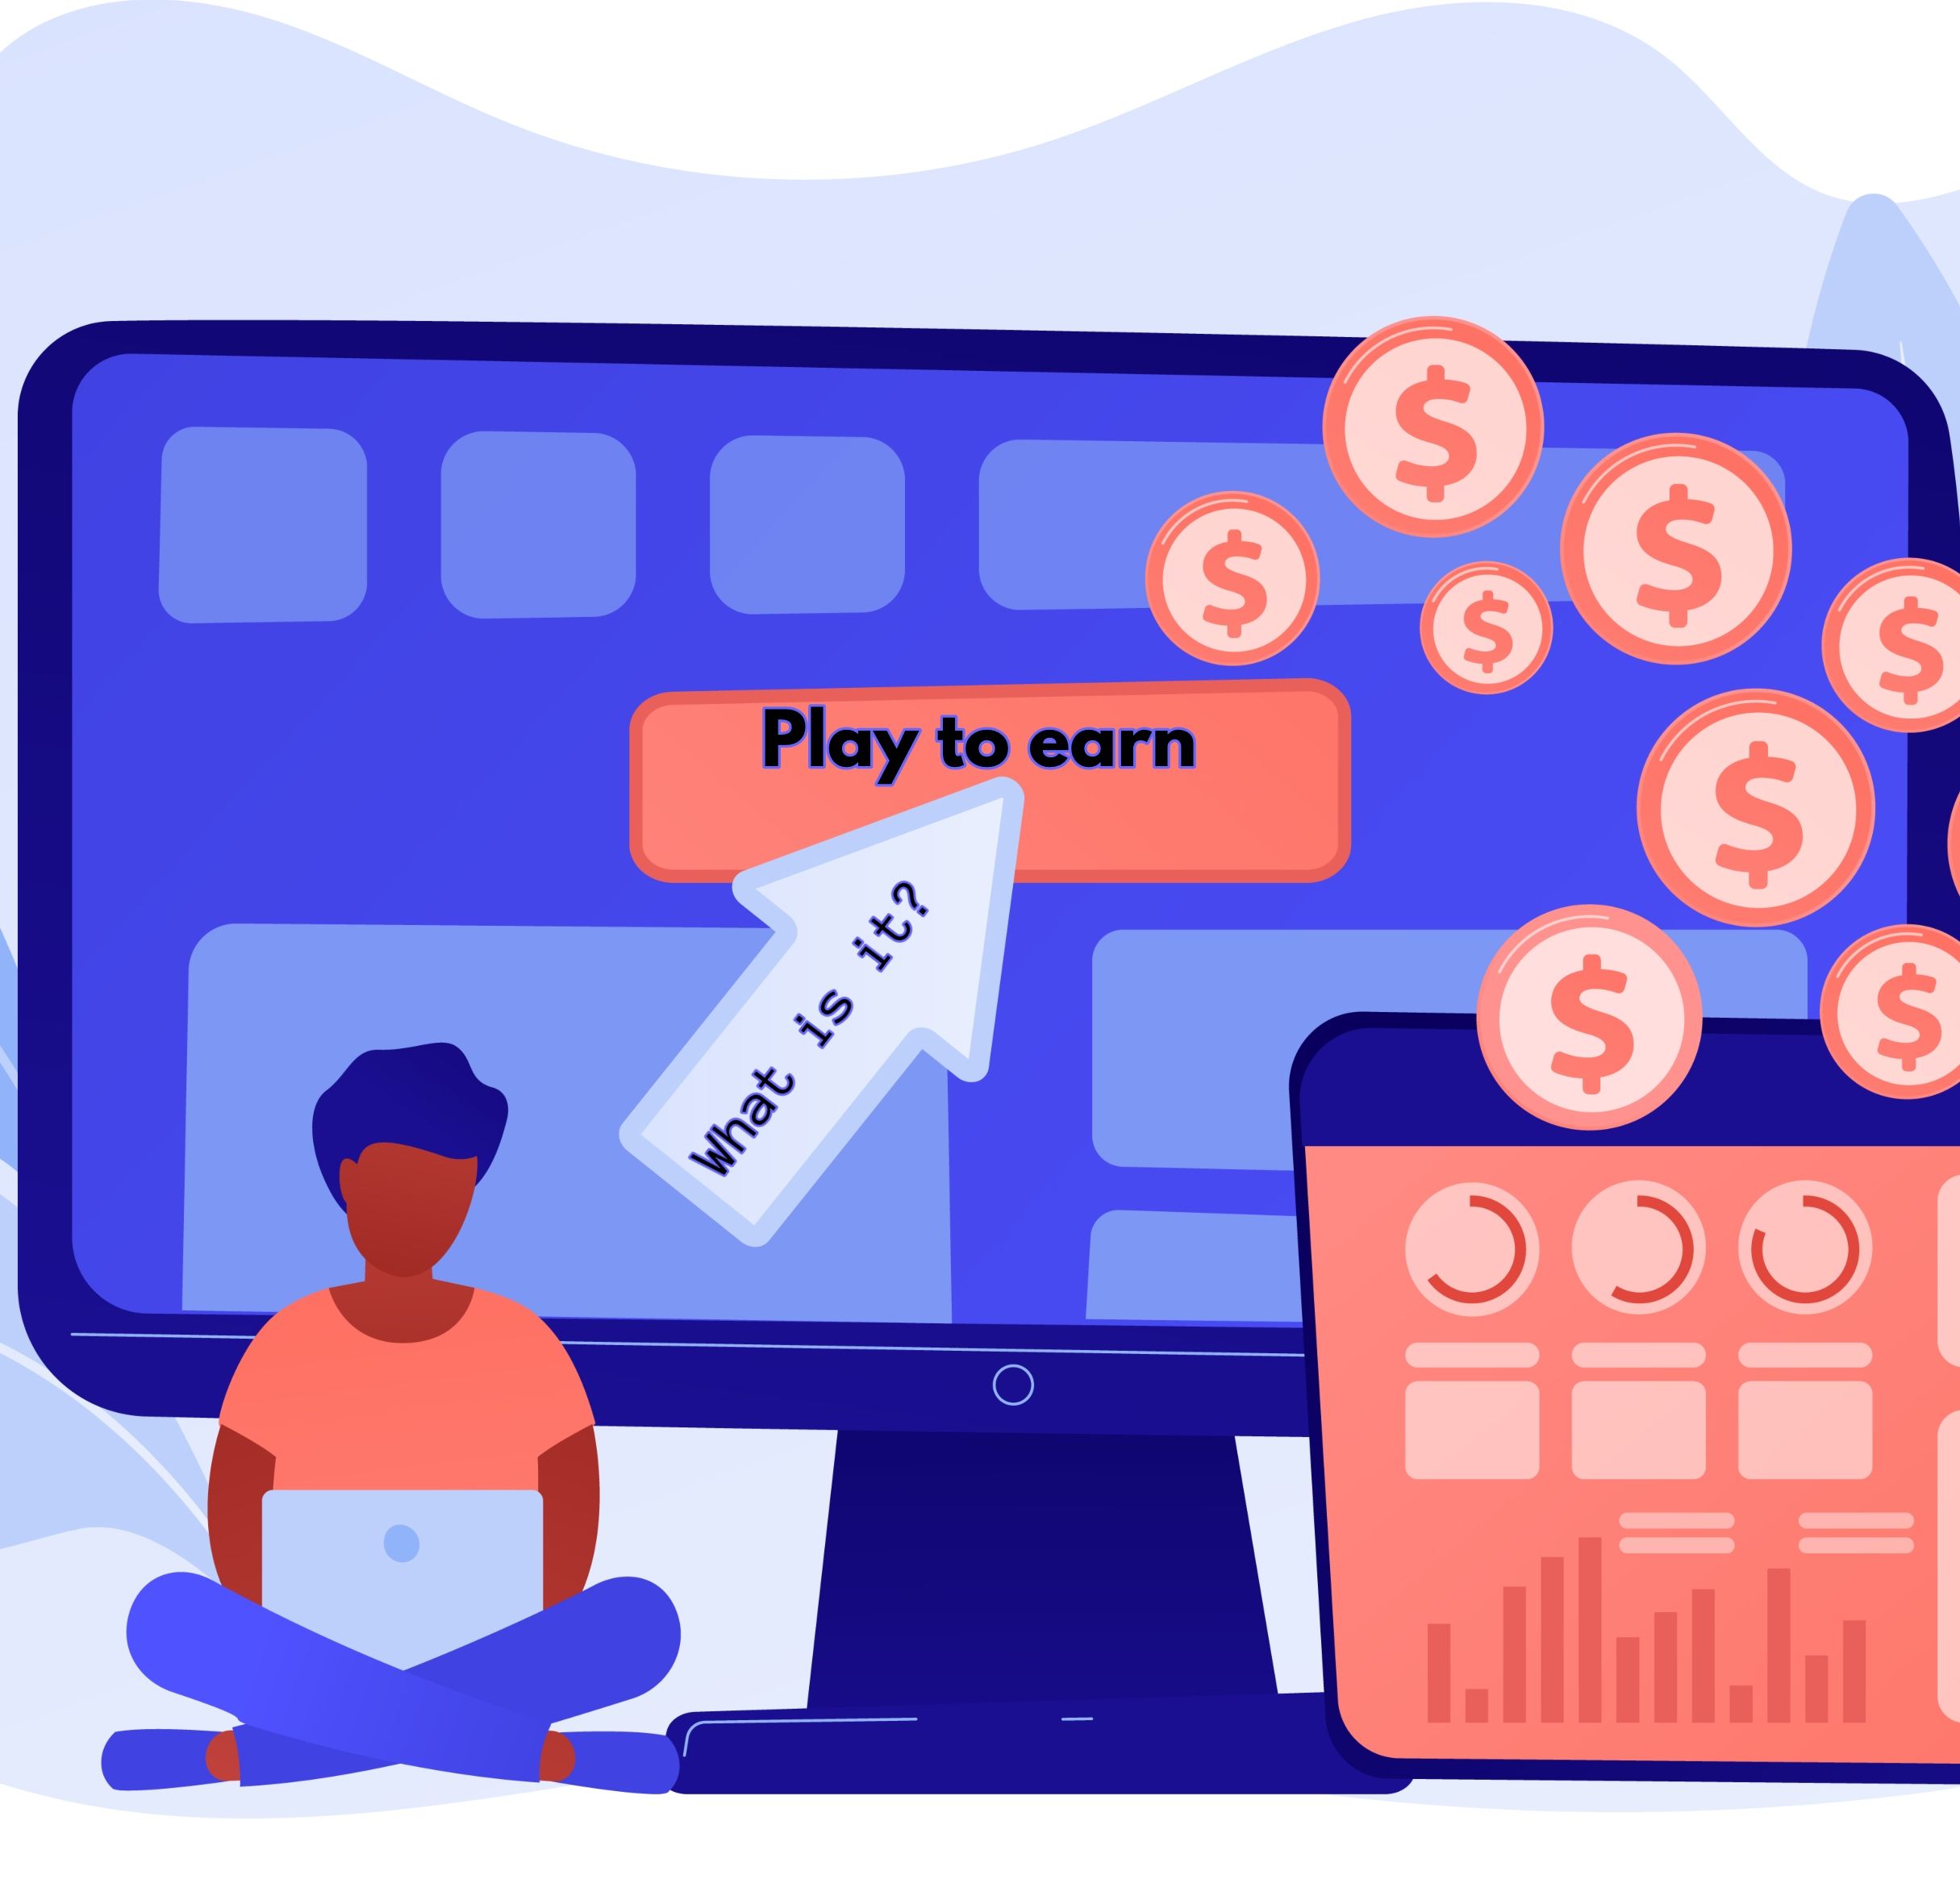 Play to earn, what is it?